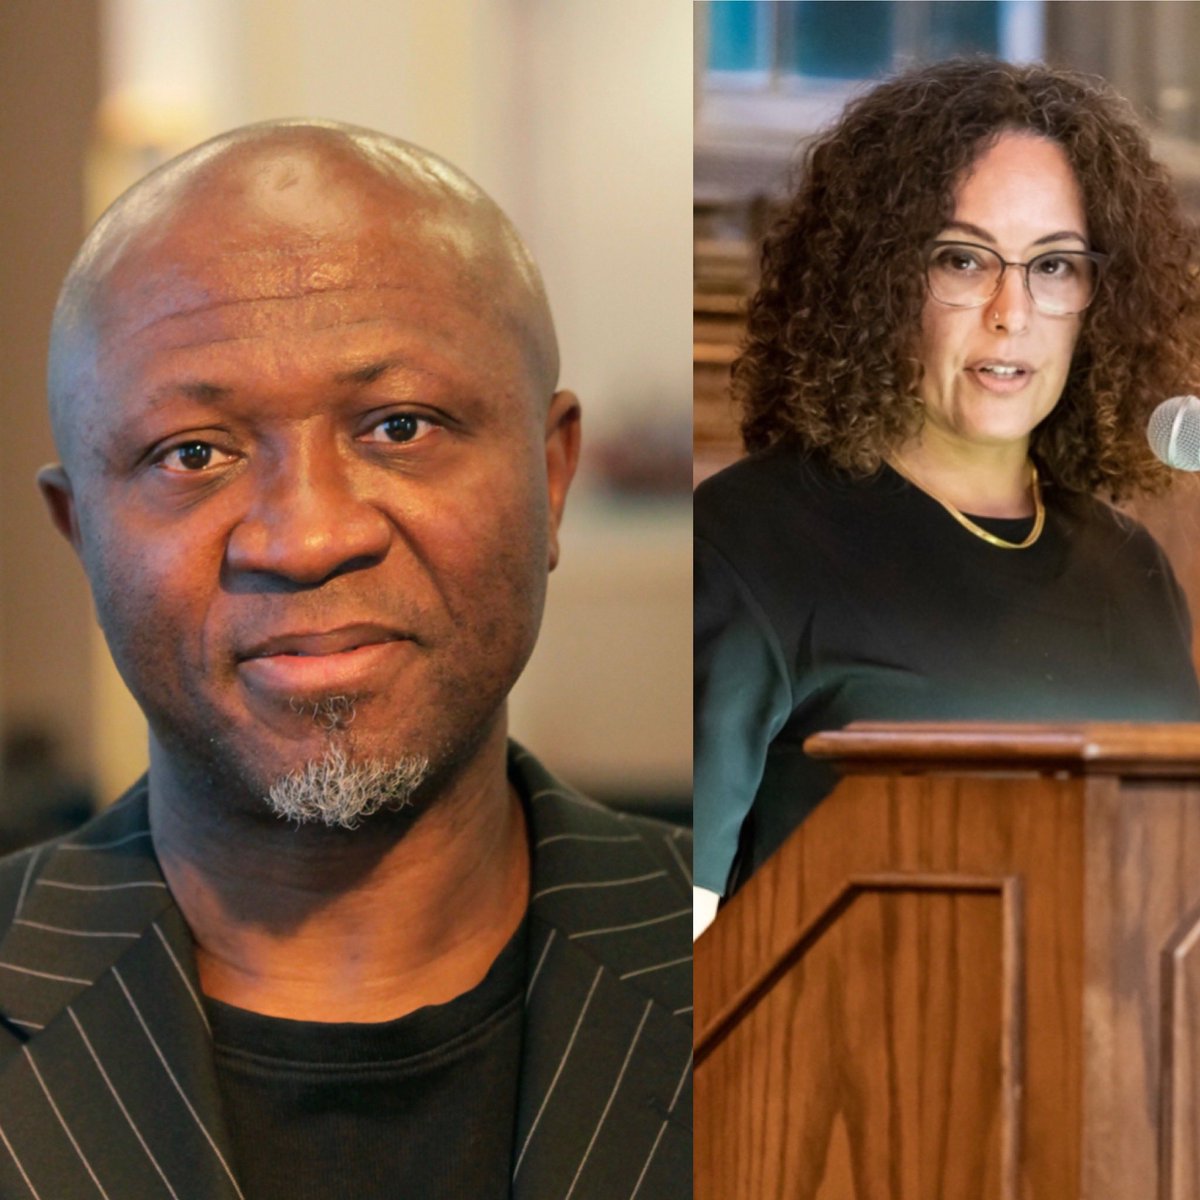 ✨🎓2 of my favourite peoples on this planet are coming to LSE next week! Prof Grovogui will deliver the @LSEHumanRights Annual Human Rights Day talk and be in conversation with prof @ShieraM Shiera Malik. Online and in person: lse.ac.uk/Events/2022/12… @LSEsociology @AfricaAtLSE